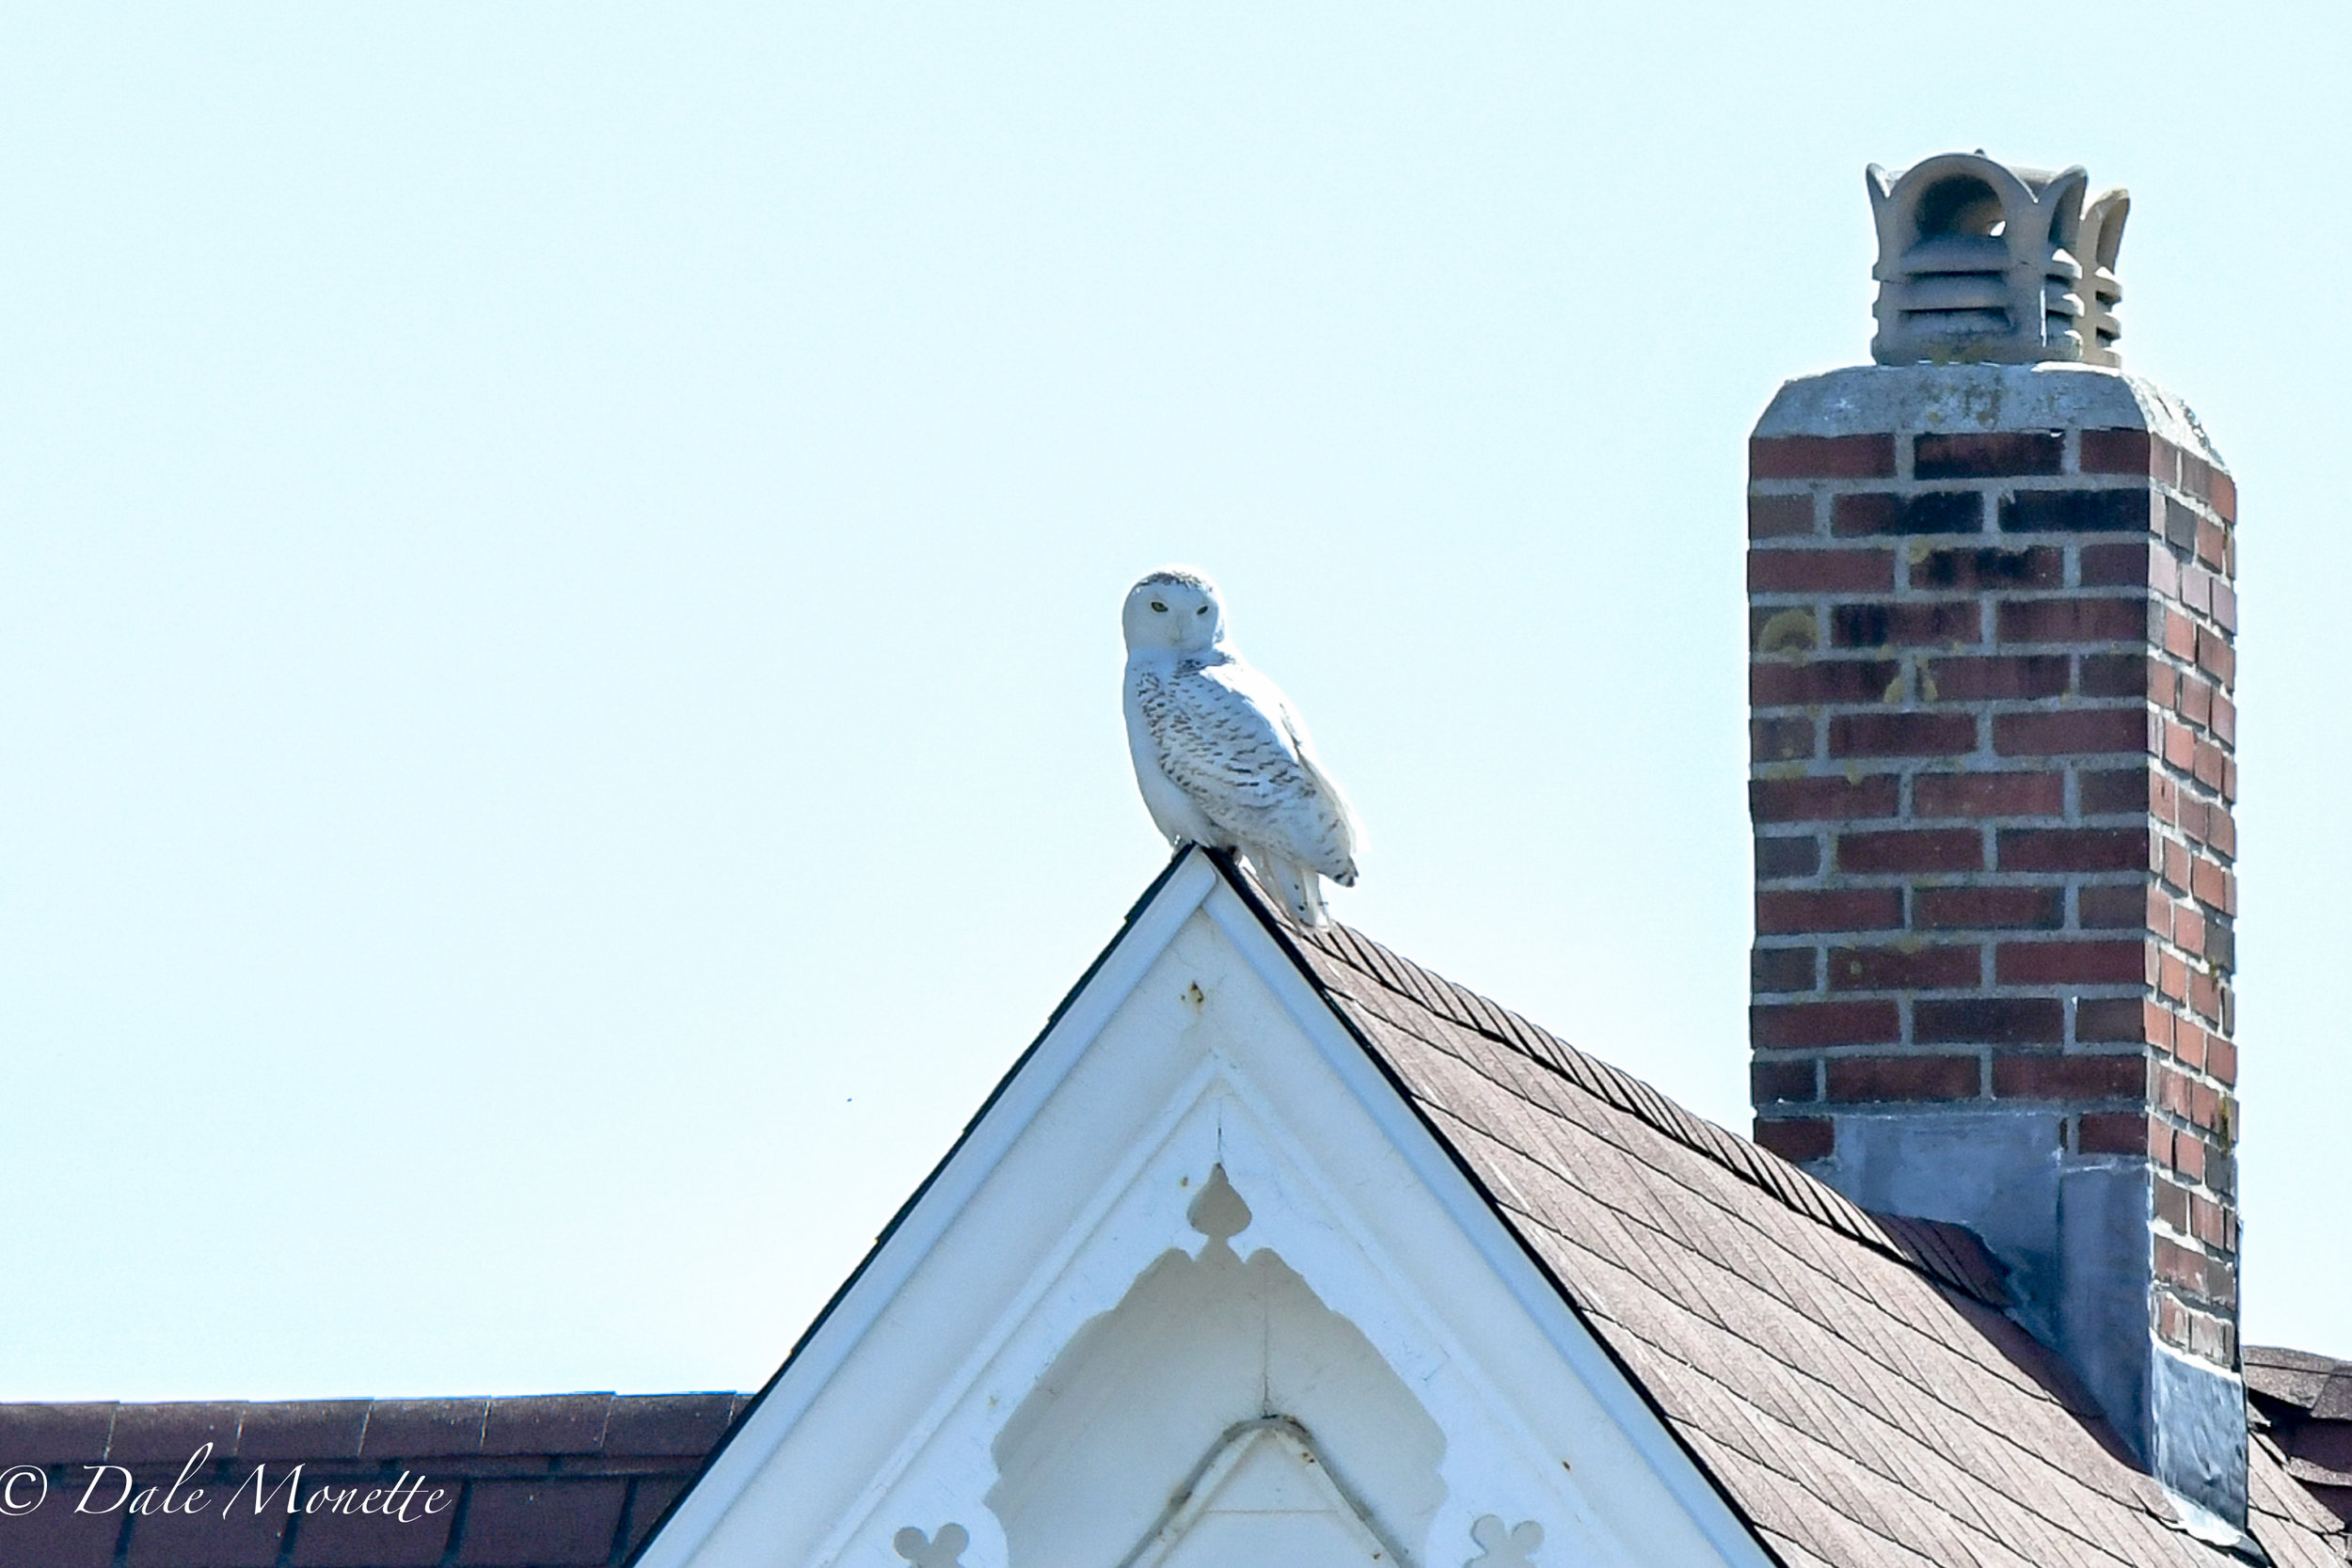   This is the house connected to Nubble Lighthouse in York Maine. We visited it last Monday. While we were there a snowy owl landed on top of the roof point ! Quite the surprise….. 4/23/18  